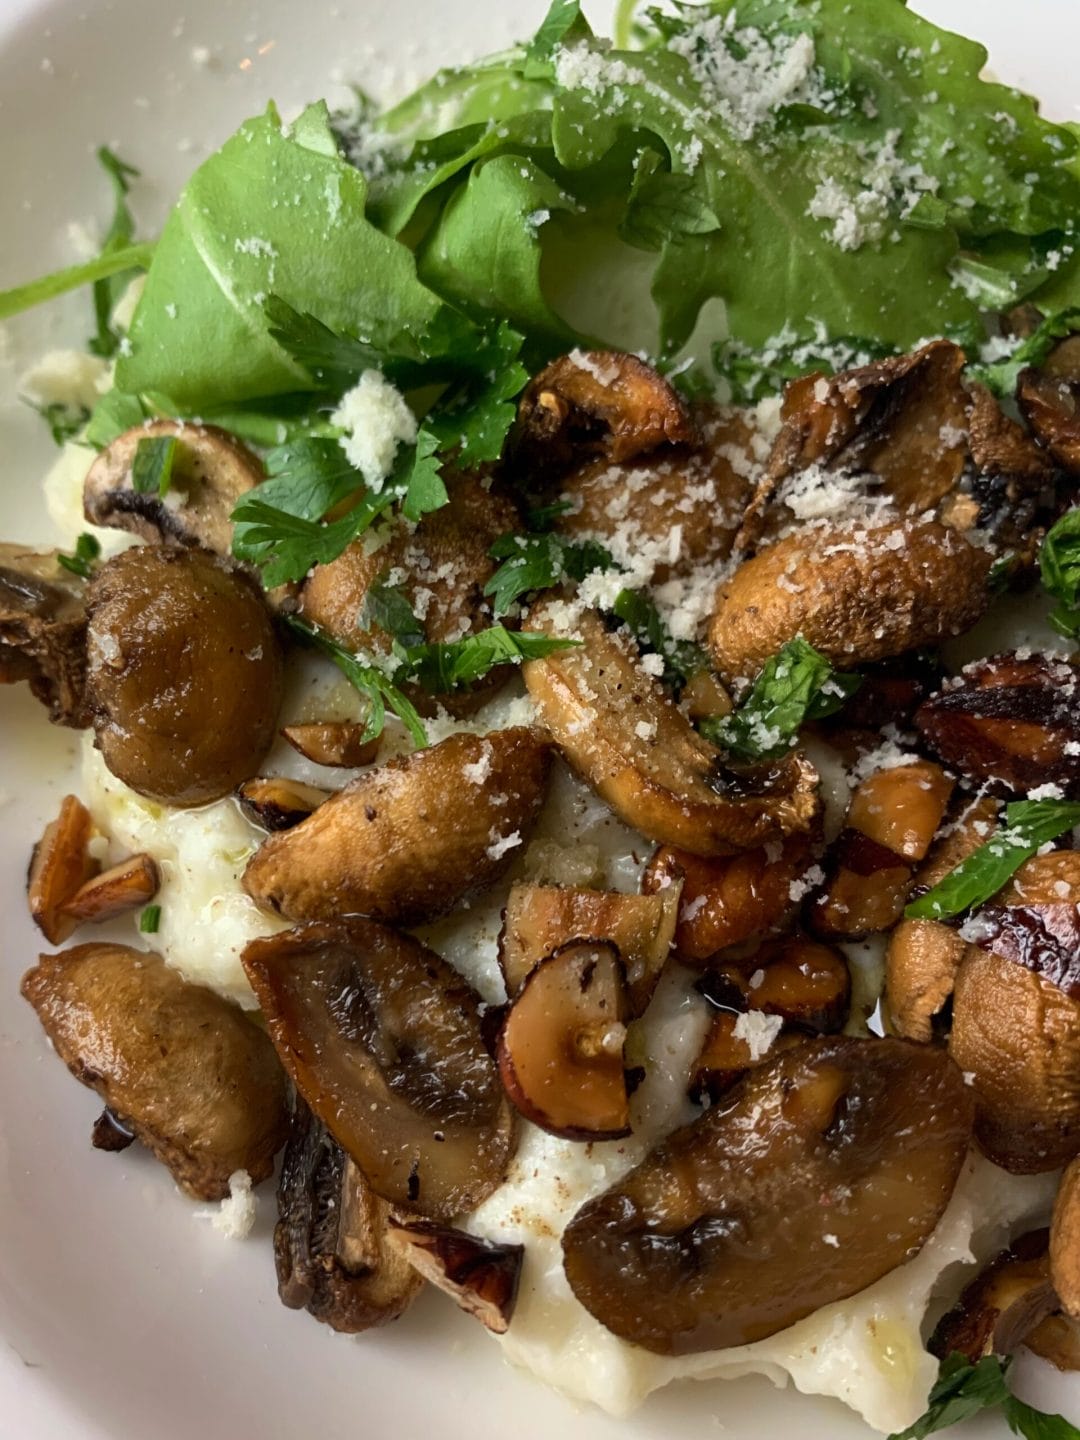 Picture of a keto bowl of roasted mushrooms with hazelnuts and arugula